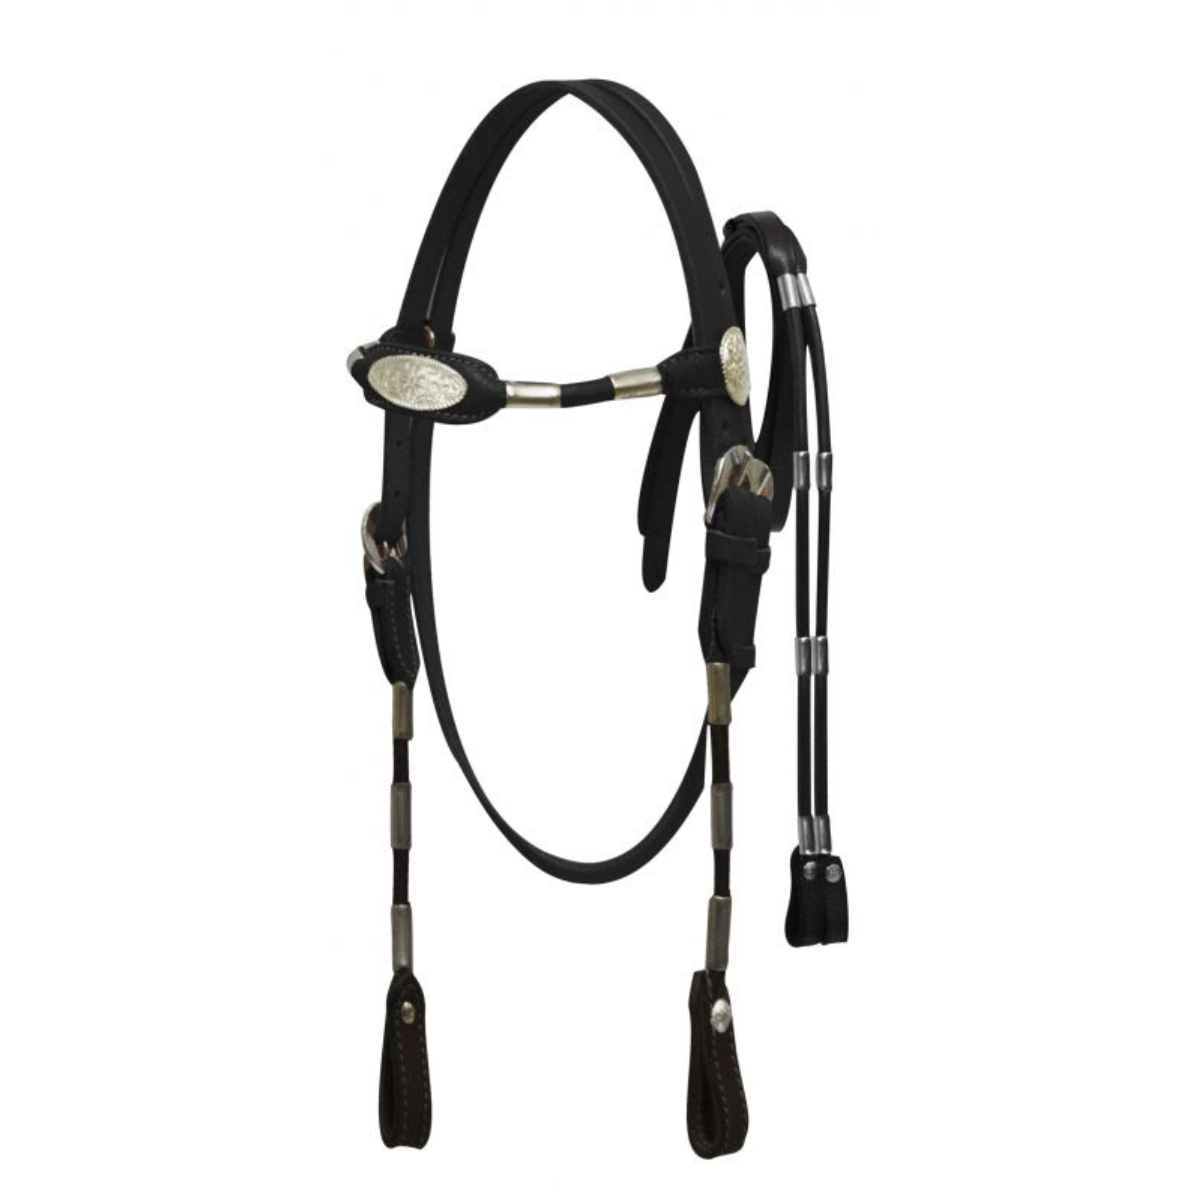 Horse size Poco headstall with reins. Fully rounded browband headstall and rein set - Double T Saddles